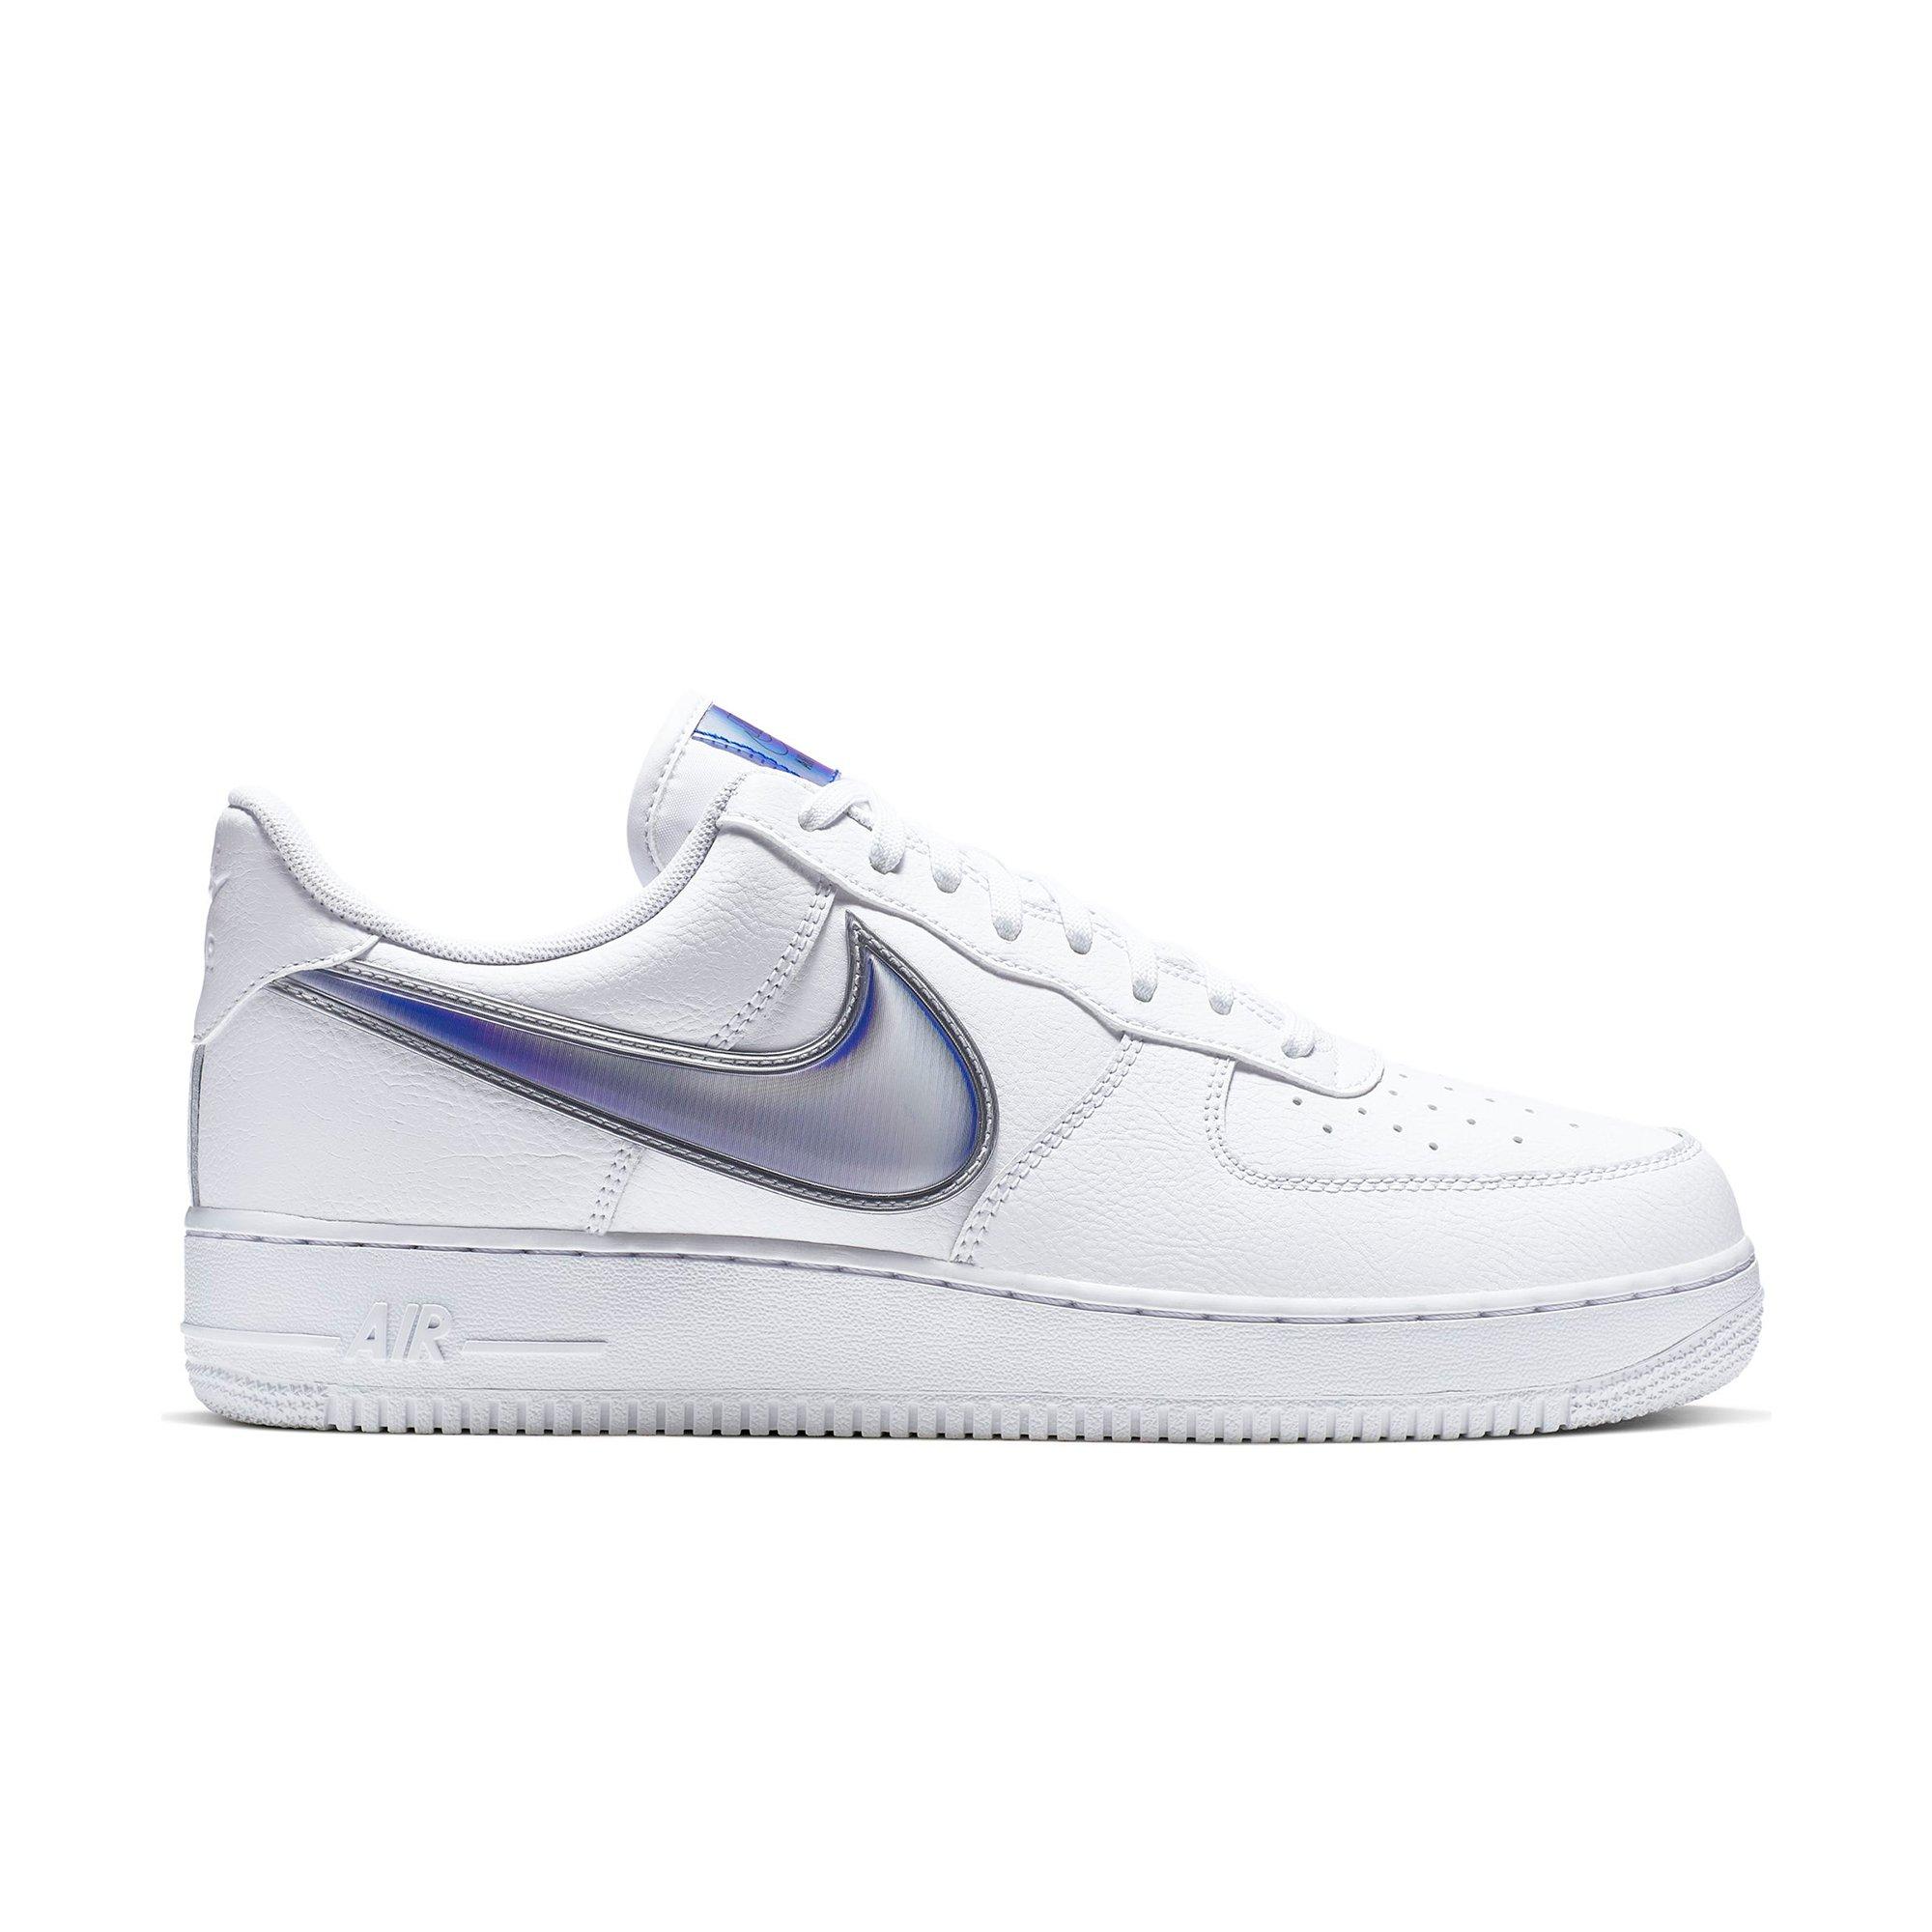 clear nike air force ones